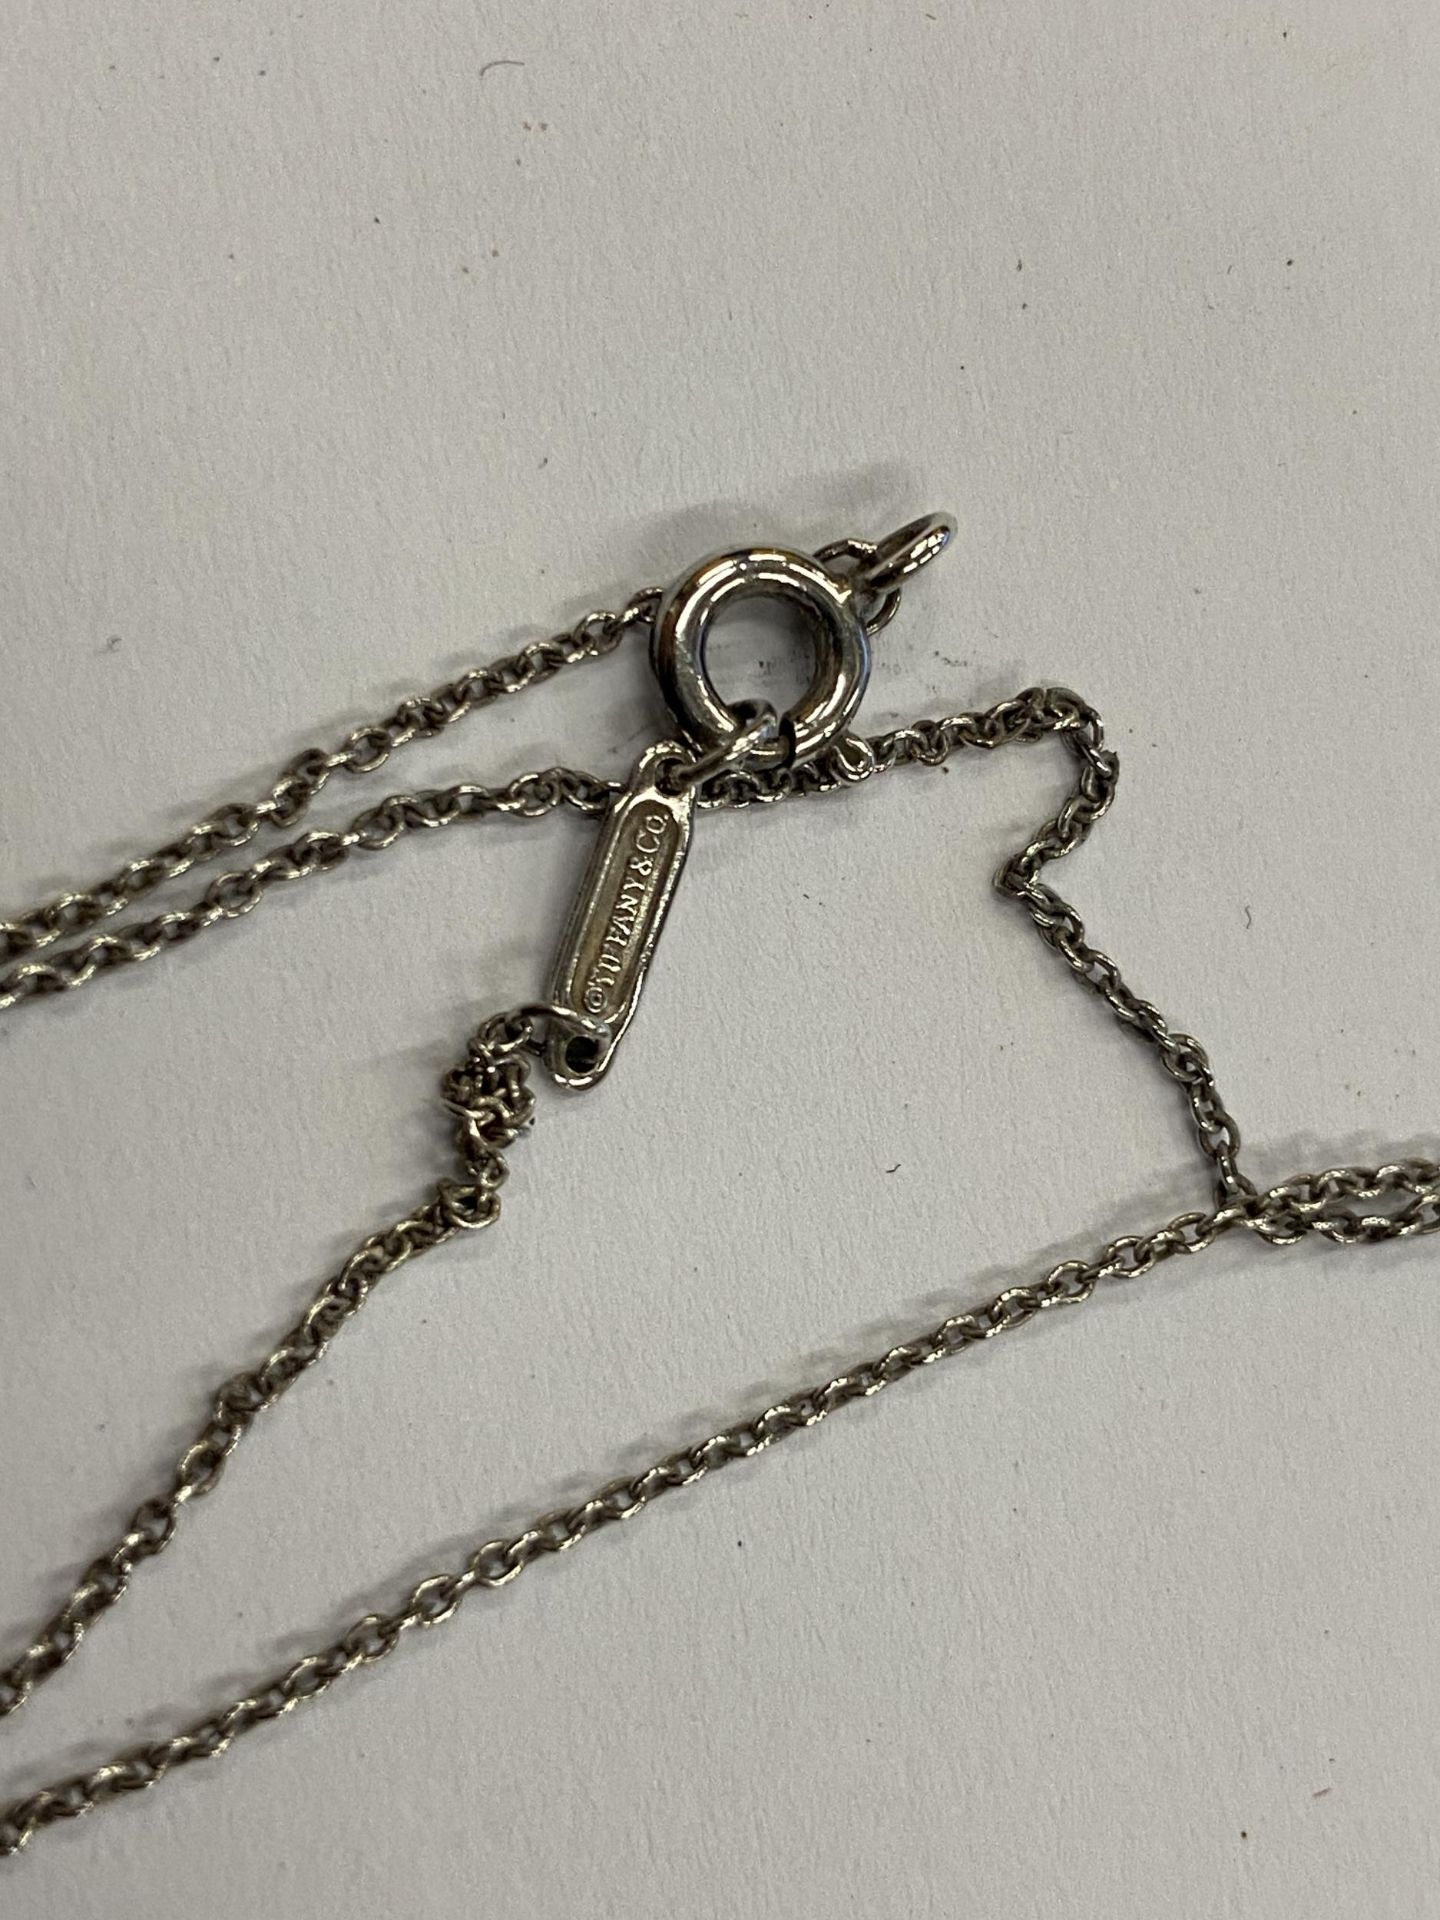 A TIFFANY & CO .925 SILVER HEART PENDANT NECKLACE WITH TIFFANY KEY & ORIGINAL RETAILER'S BOX - Image 4 of 8